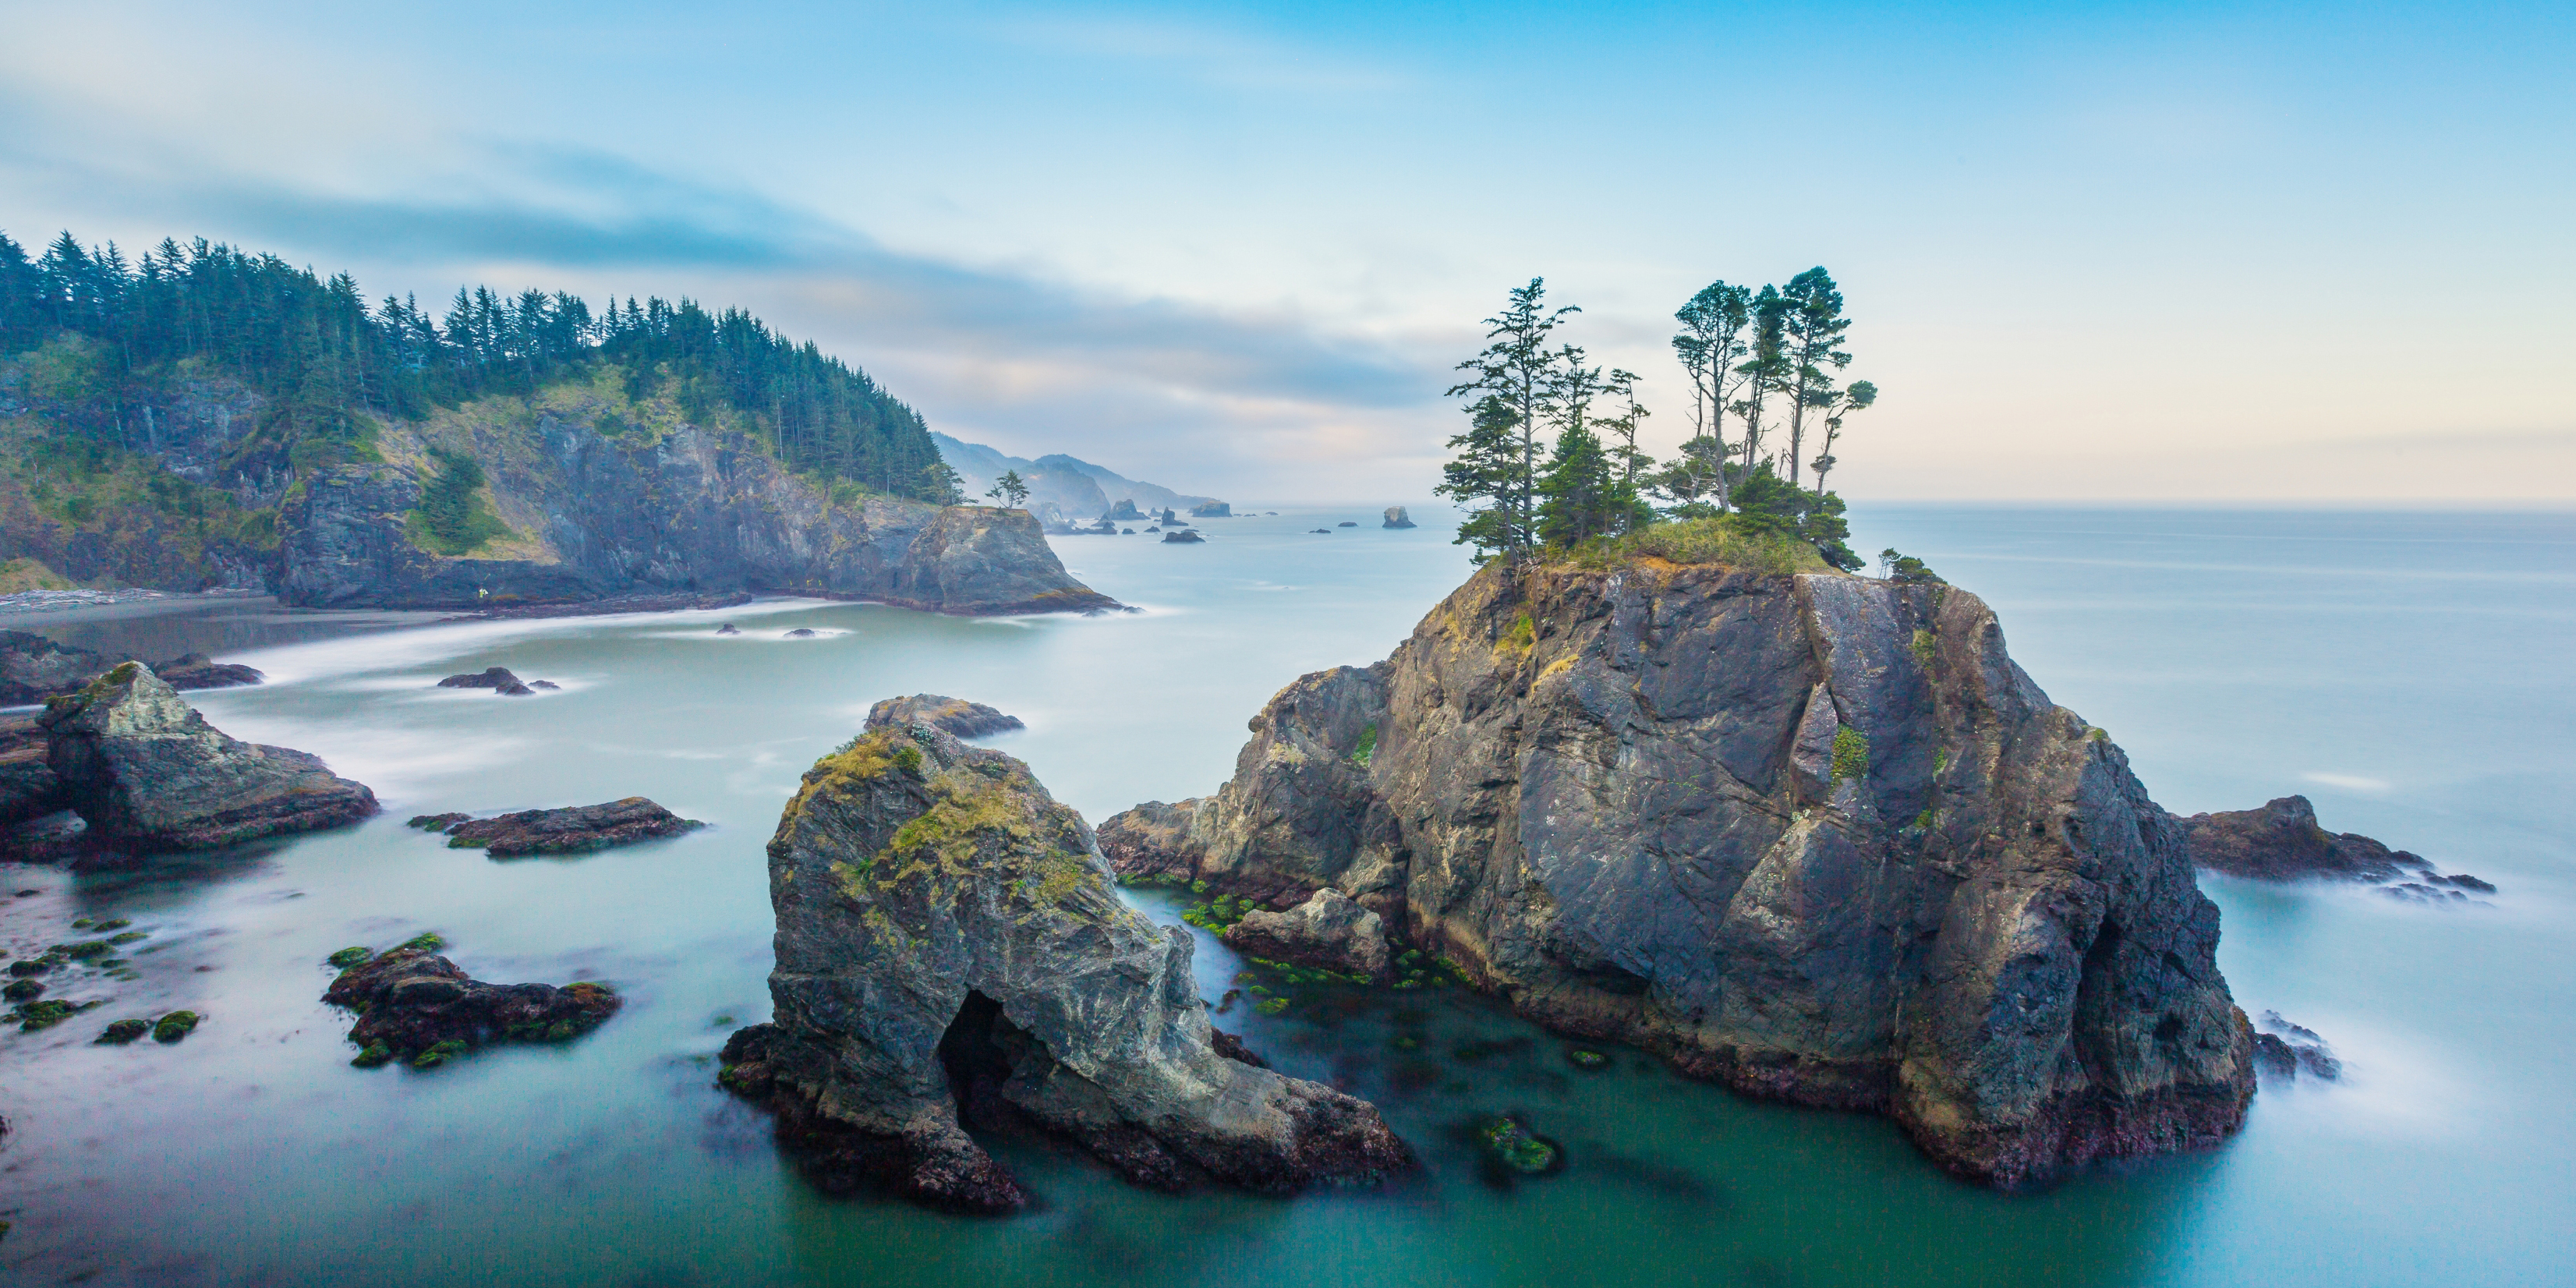 Revel in the Majestic Nature in Brookings, Oregon